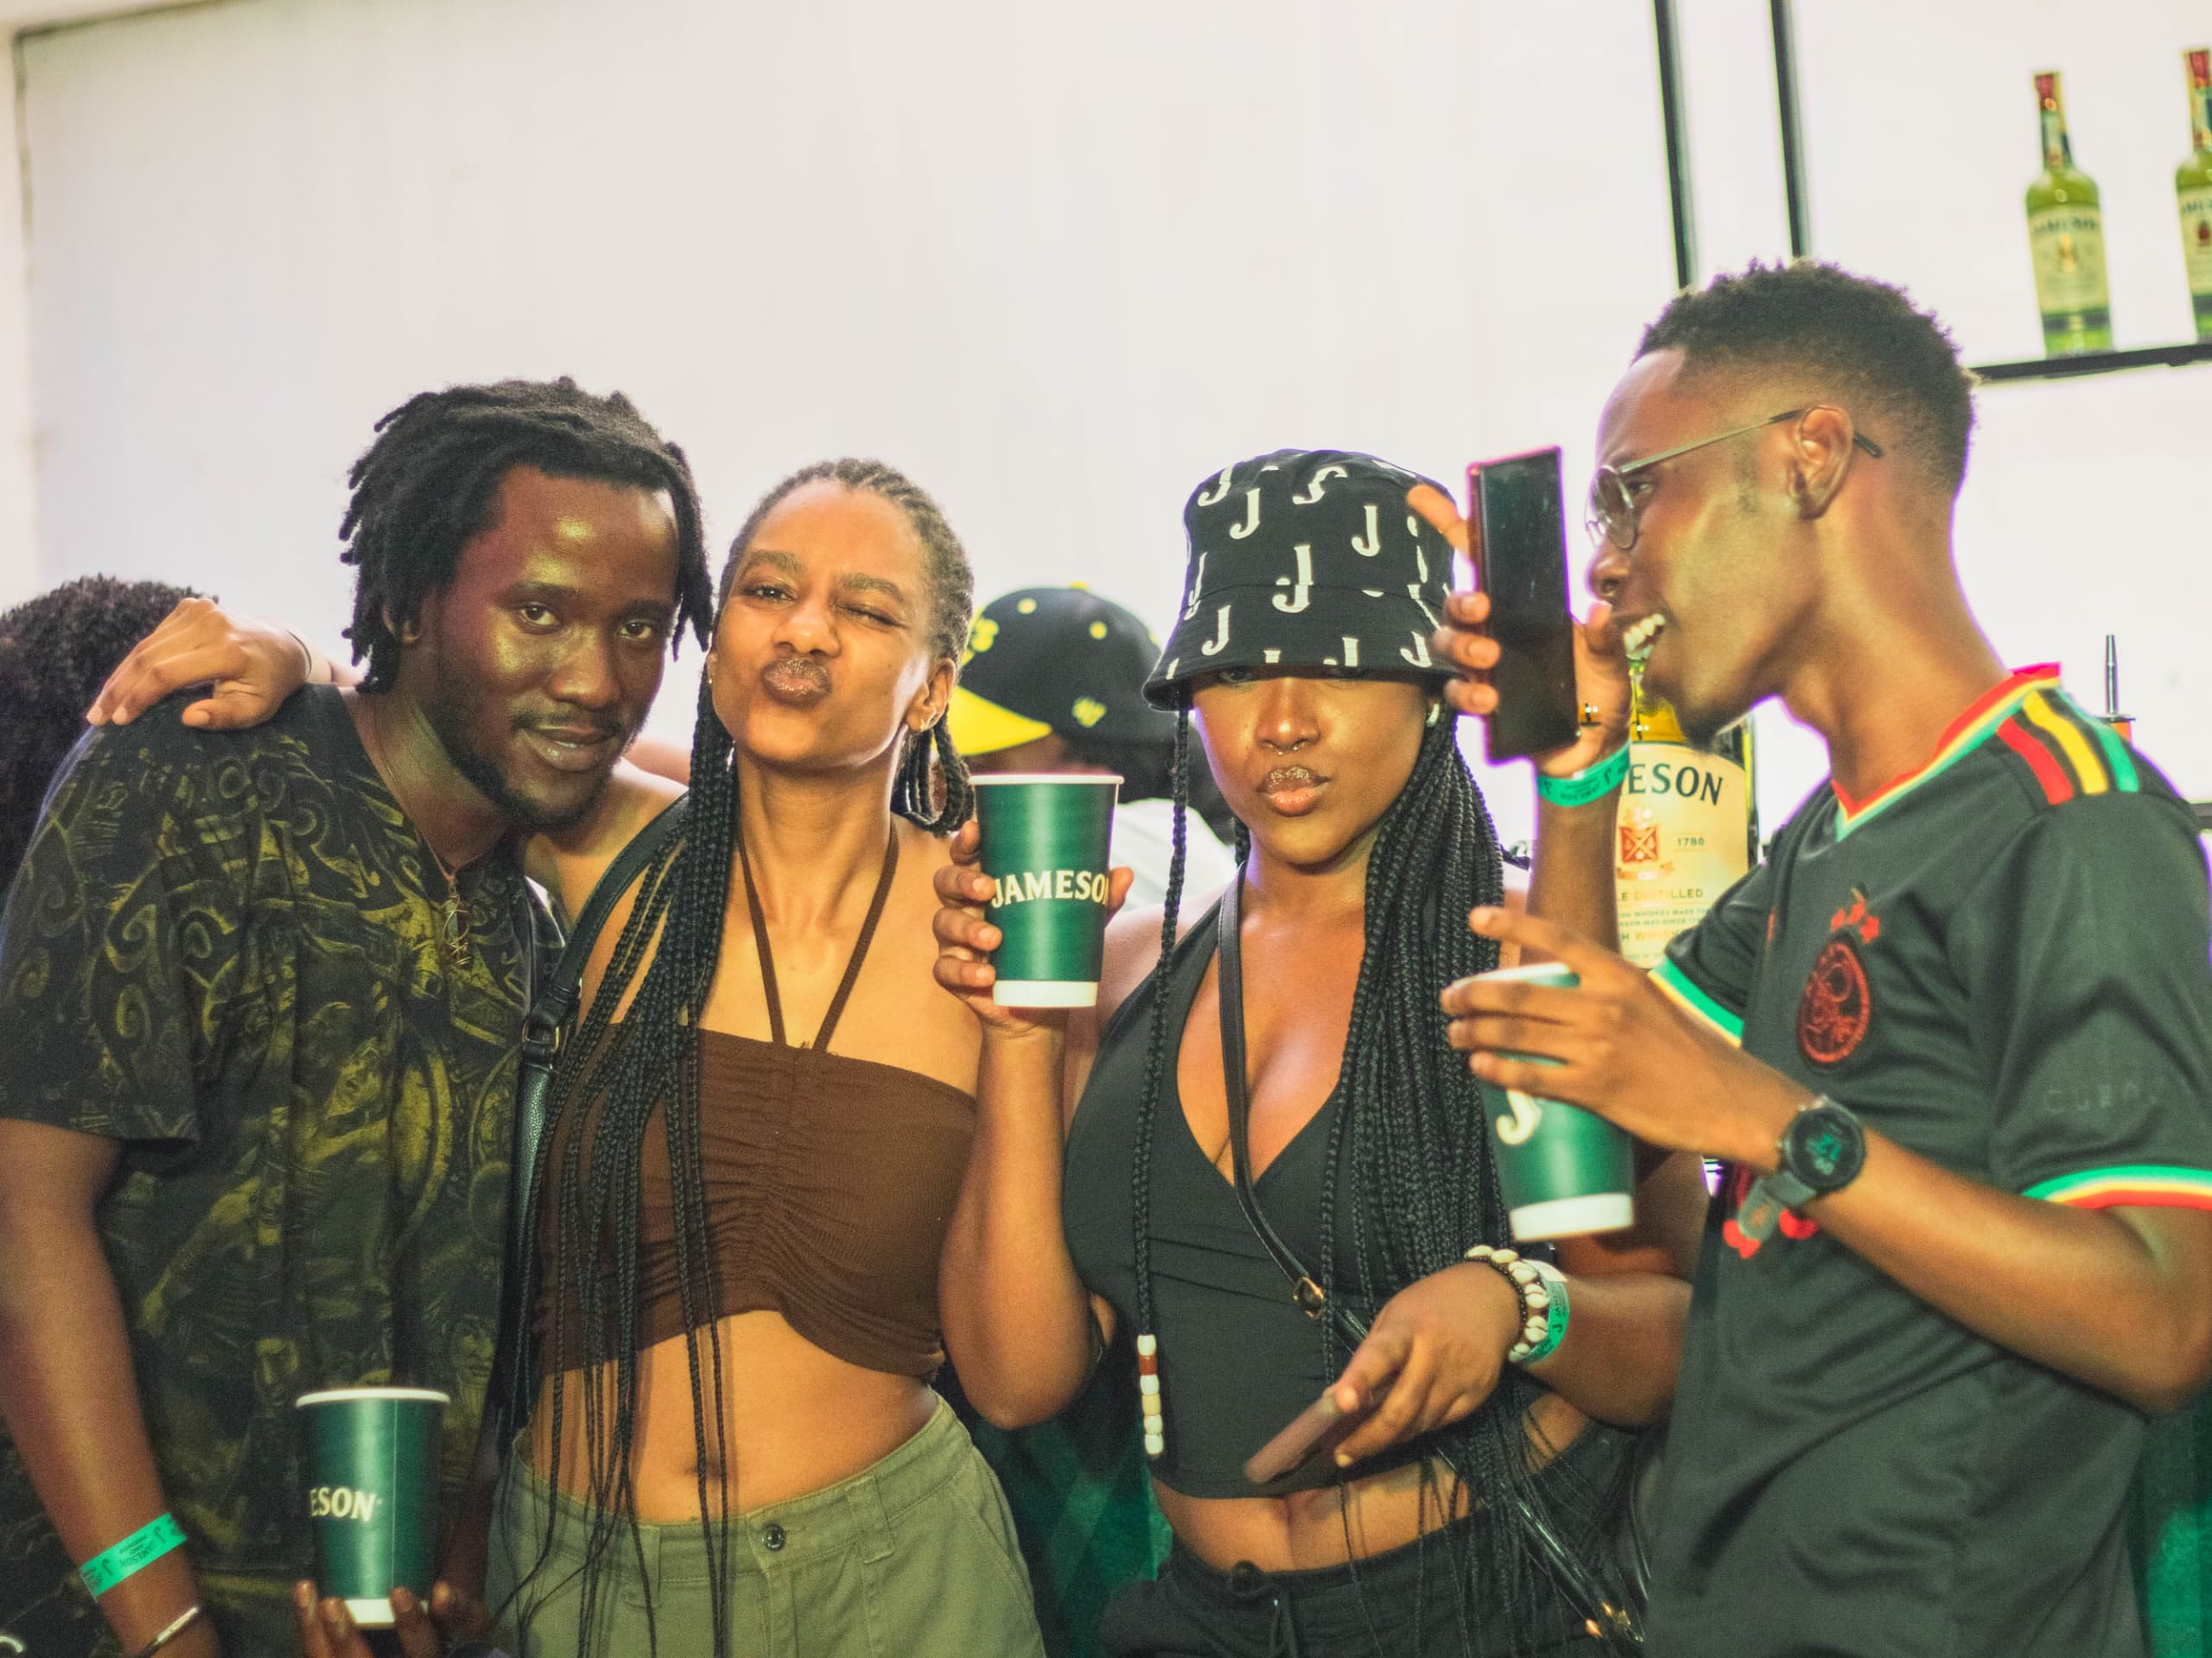 A Recap from last weekend's Jameson and Friends - March Edition